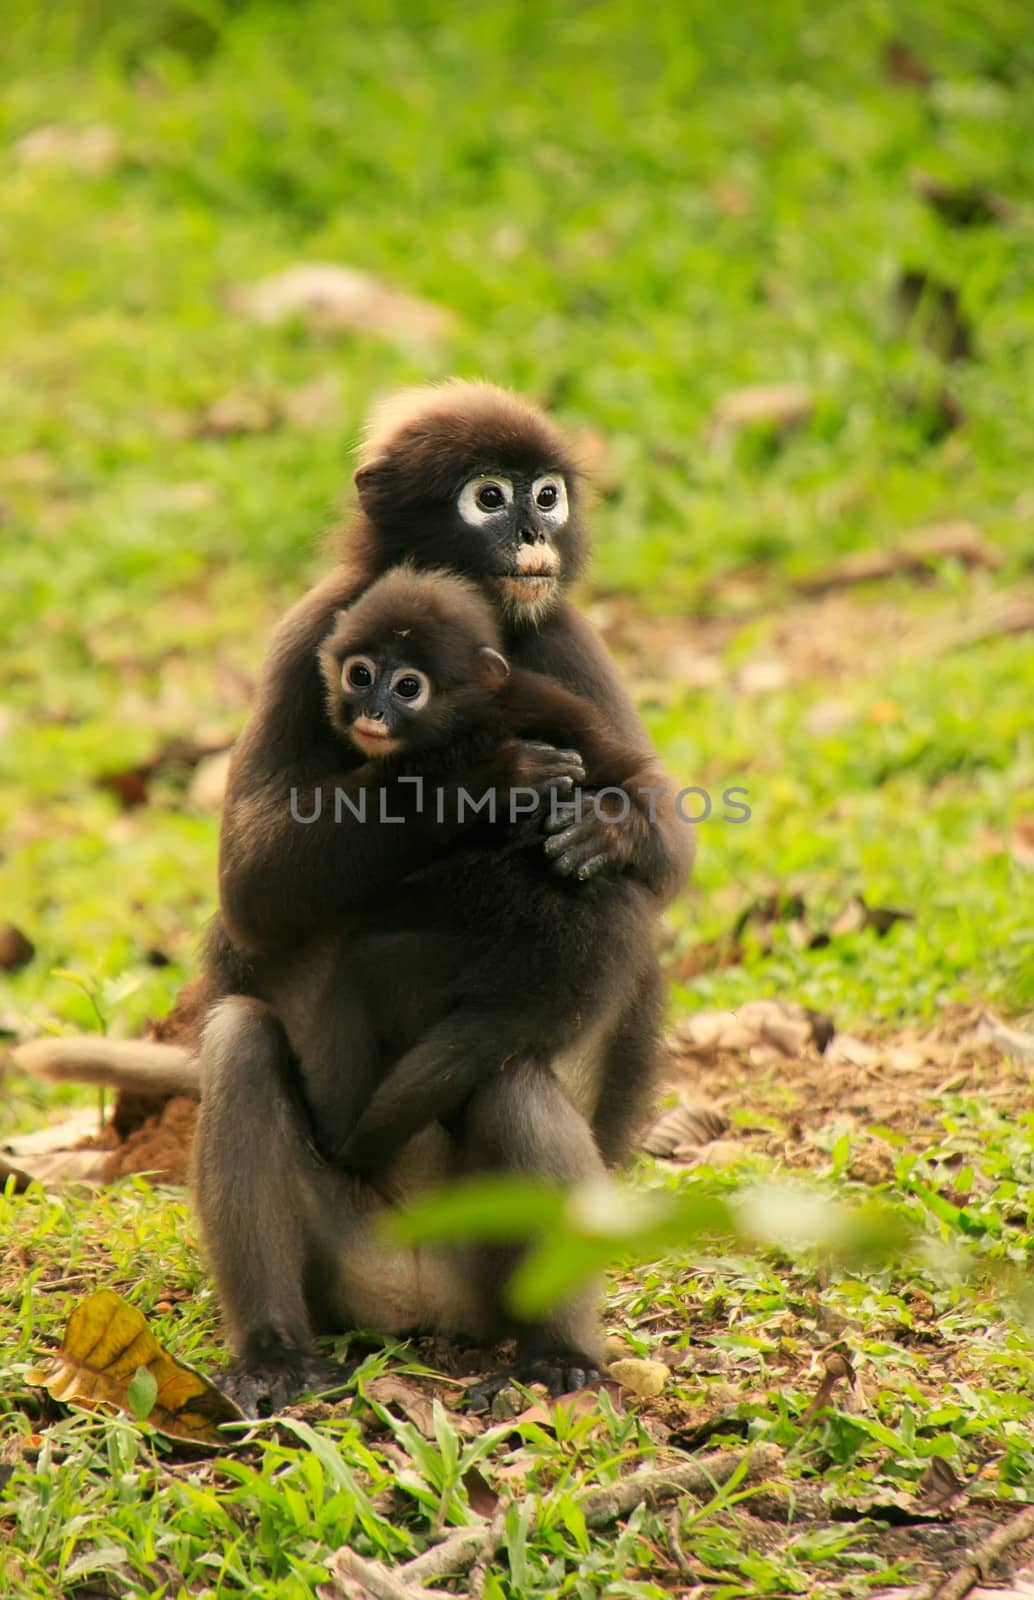 Spectacled langur sitting with a baby, Wua Talap island, Ang Thong National Marine Park, Thailand